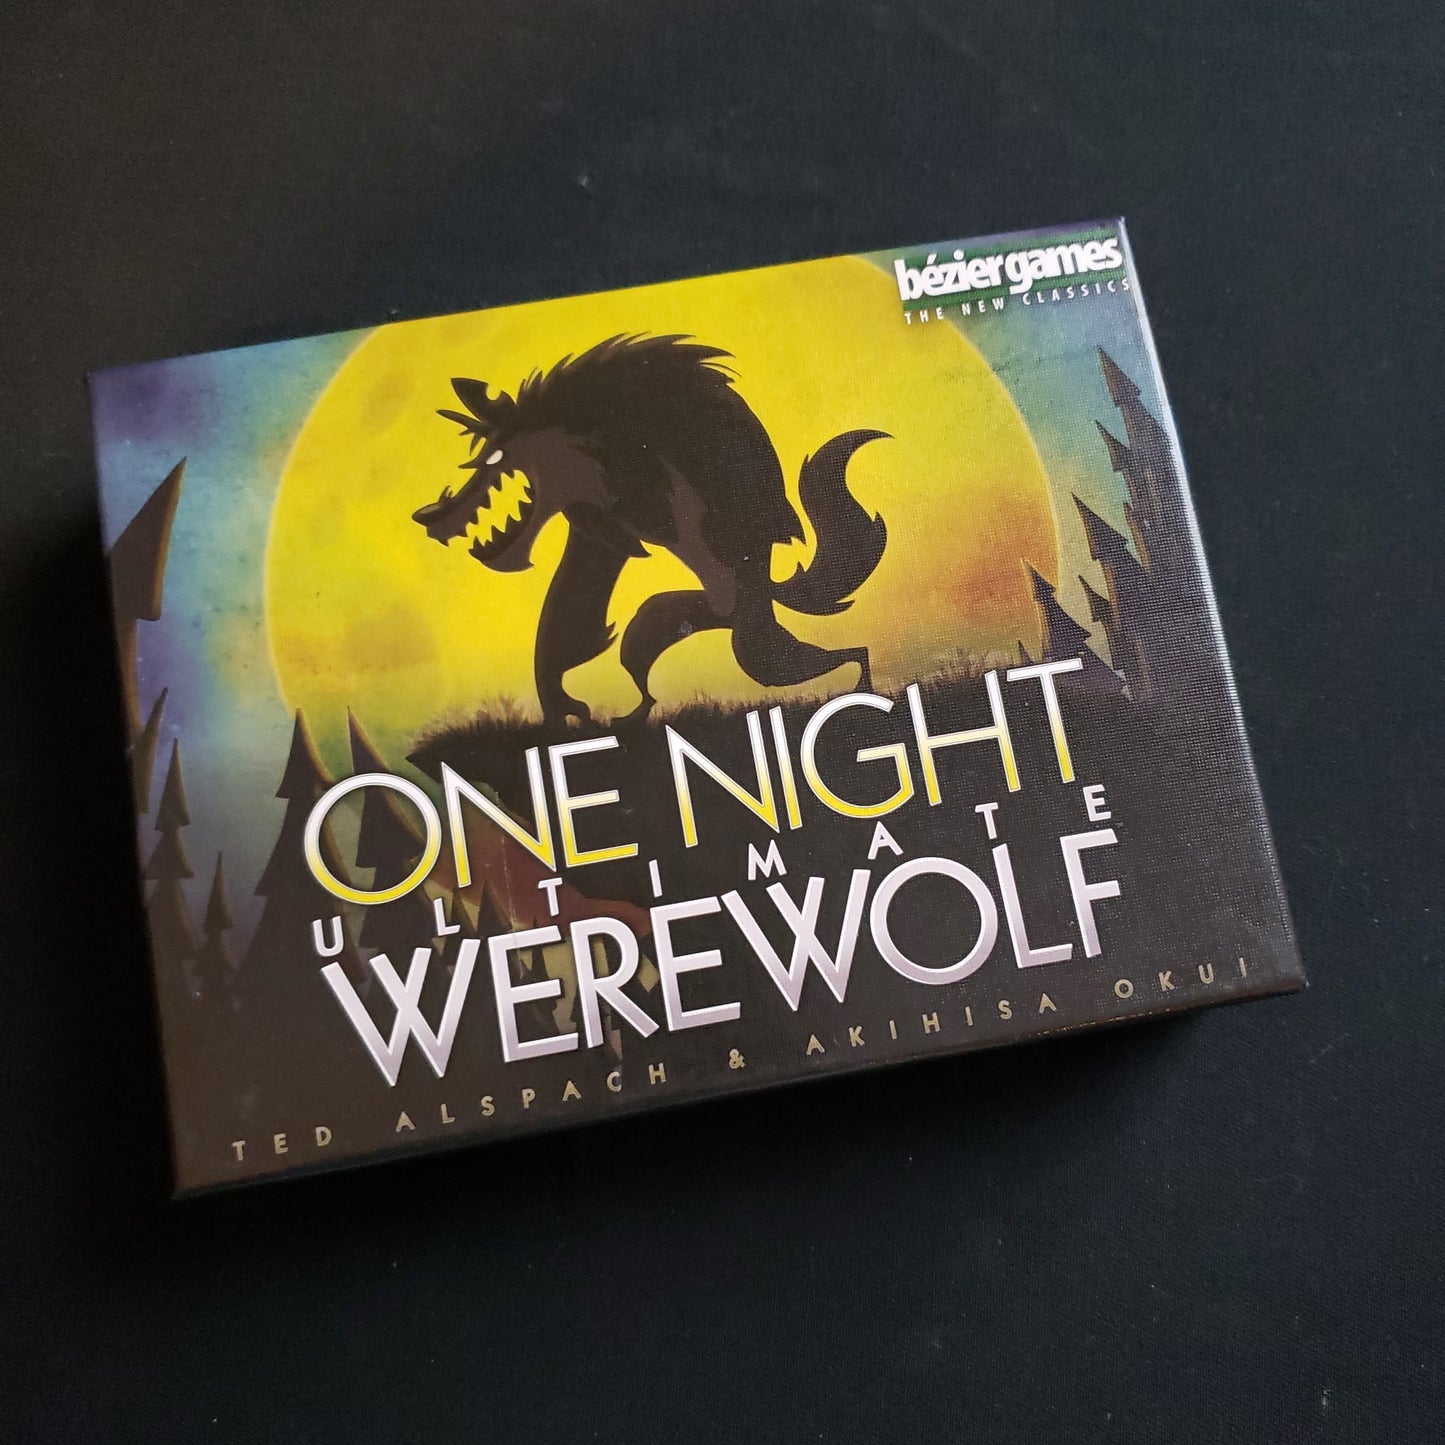 Image shows the front cover of the box of the One Night Ultimate Werewolf game